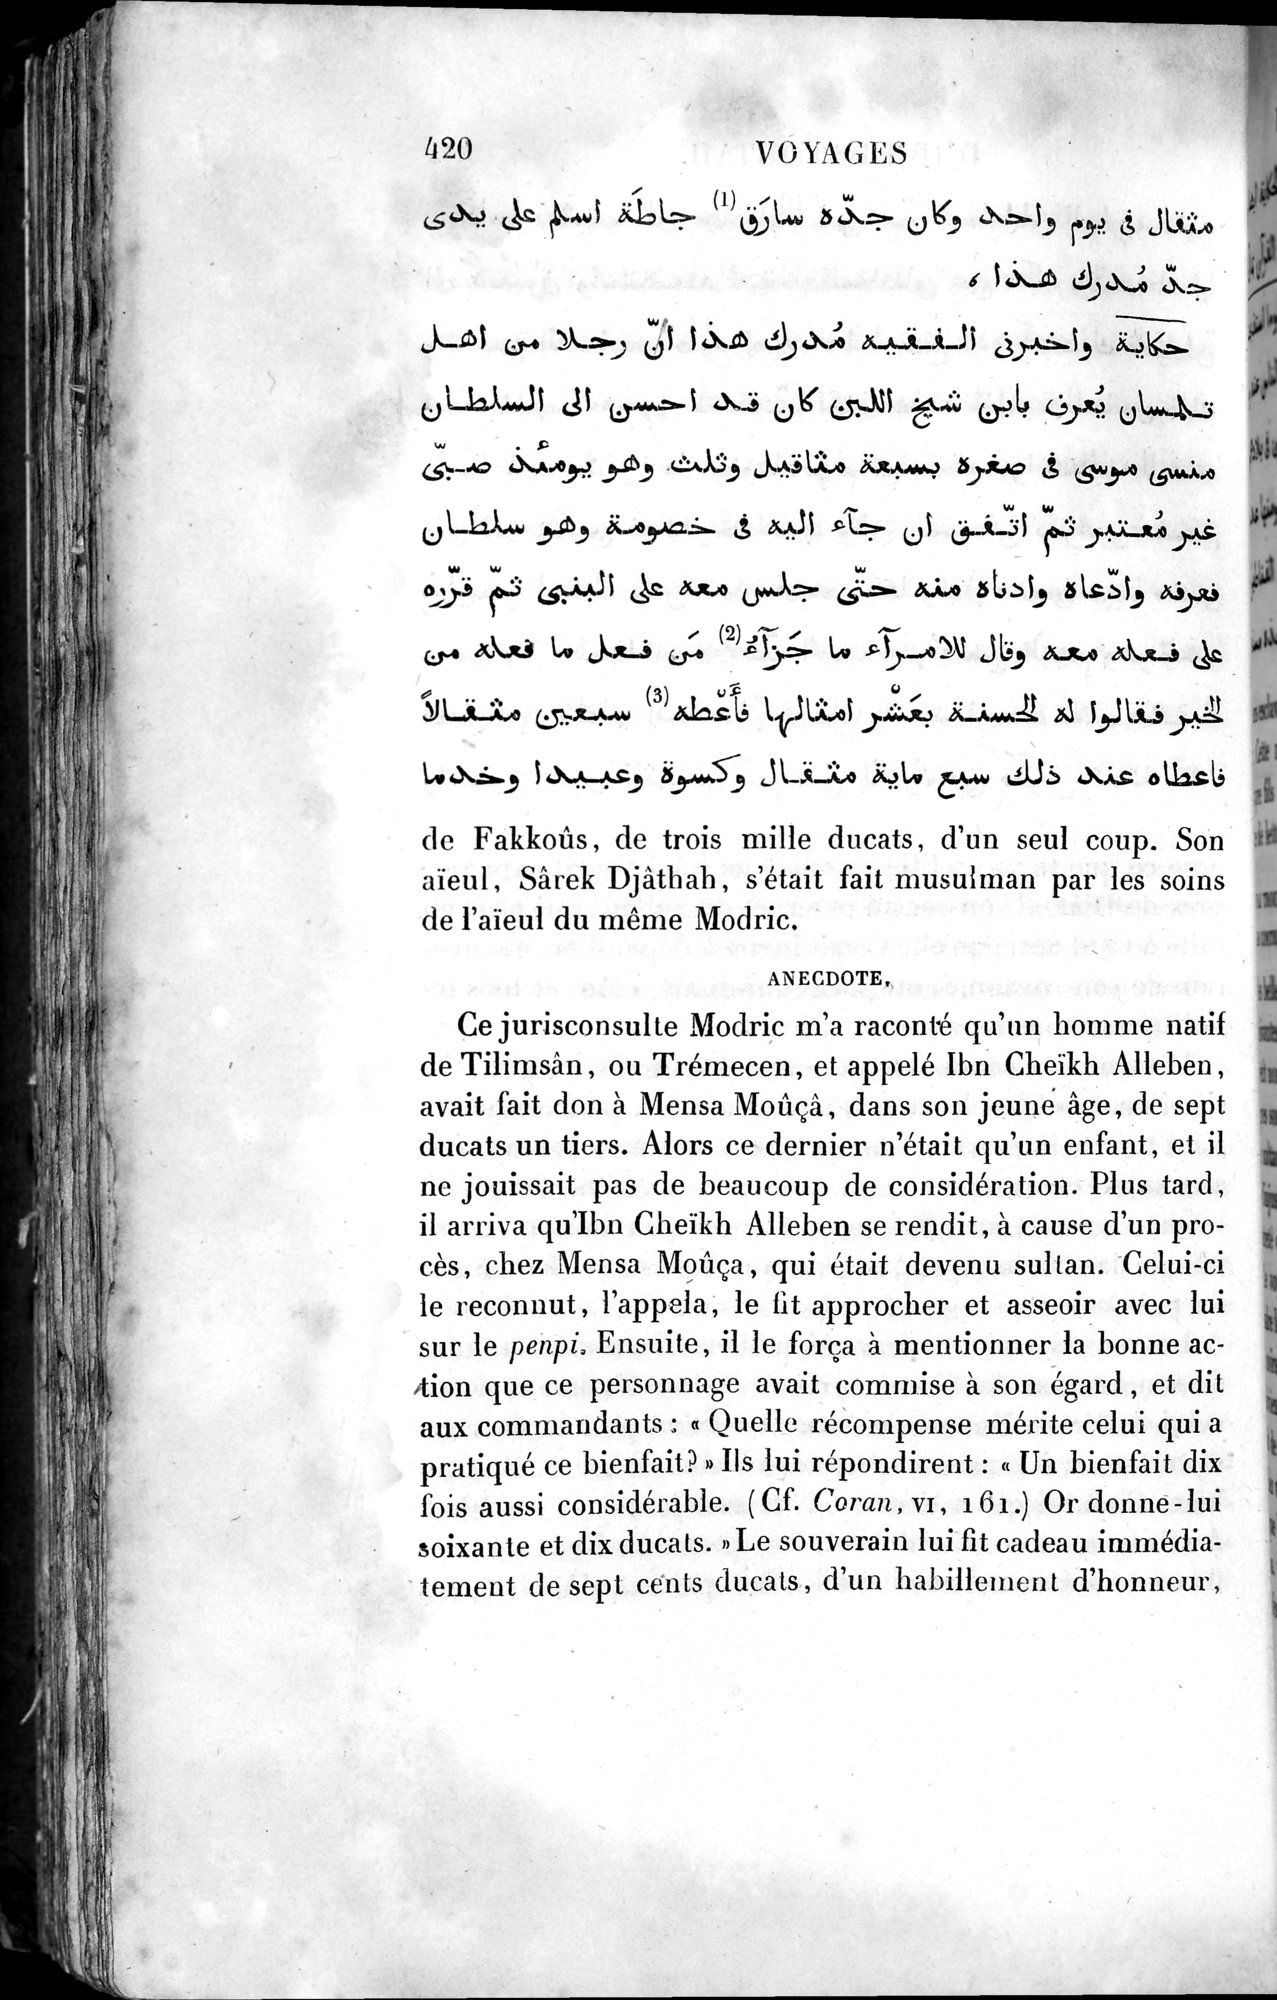 Voyages d'Ibn Batoutah : vol.4 / Page 432 (Grayscale High Resolution Image)